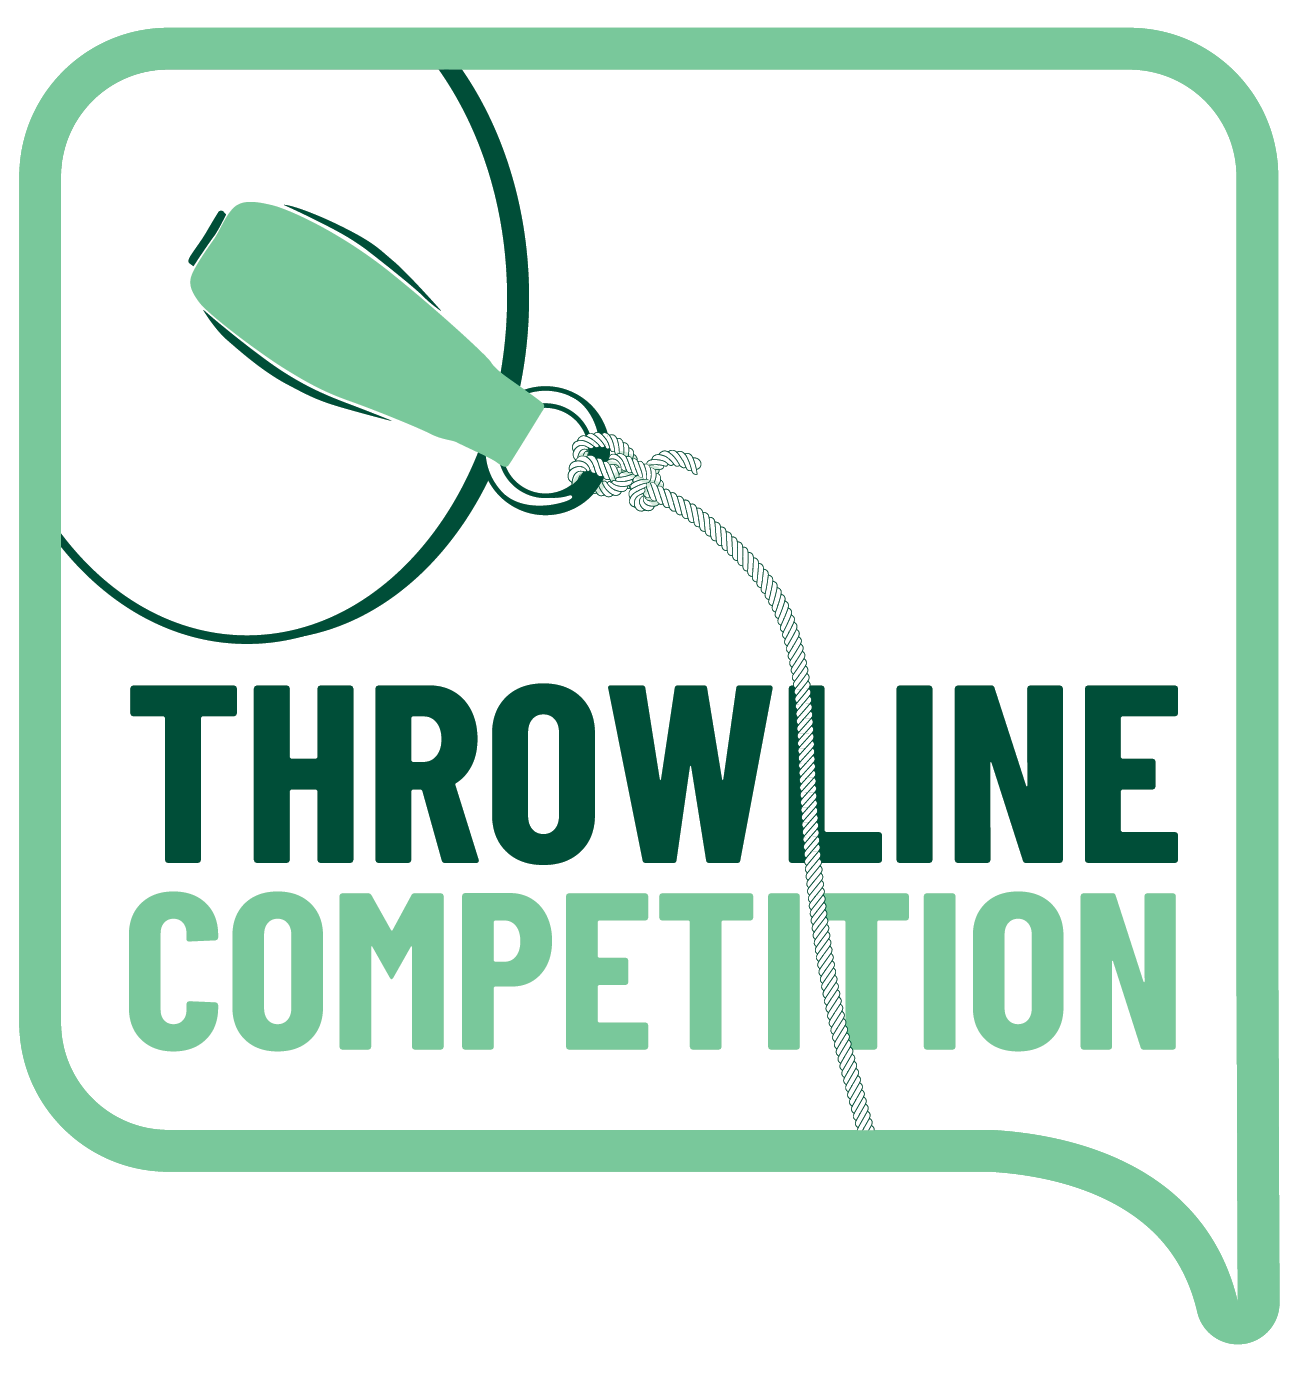 Throwline Competition